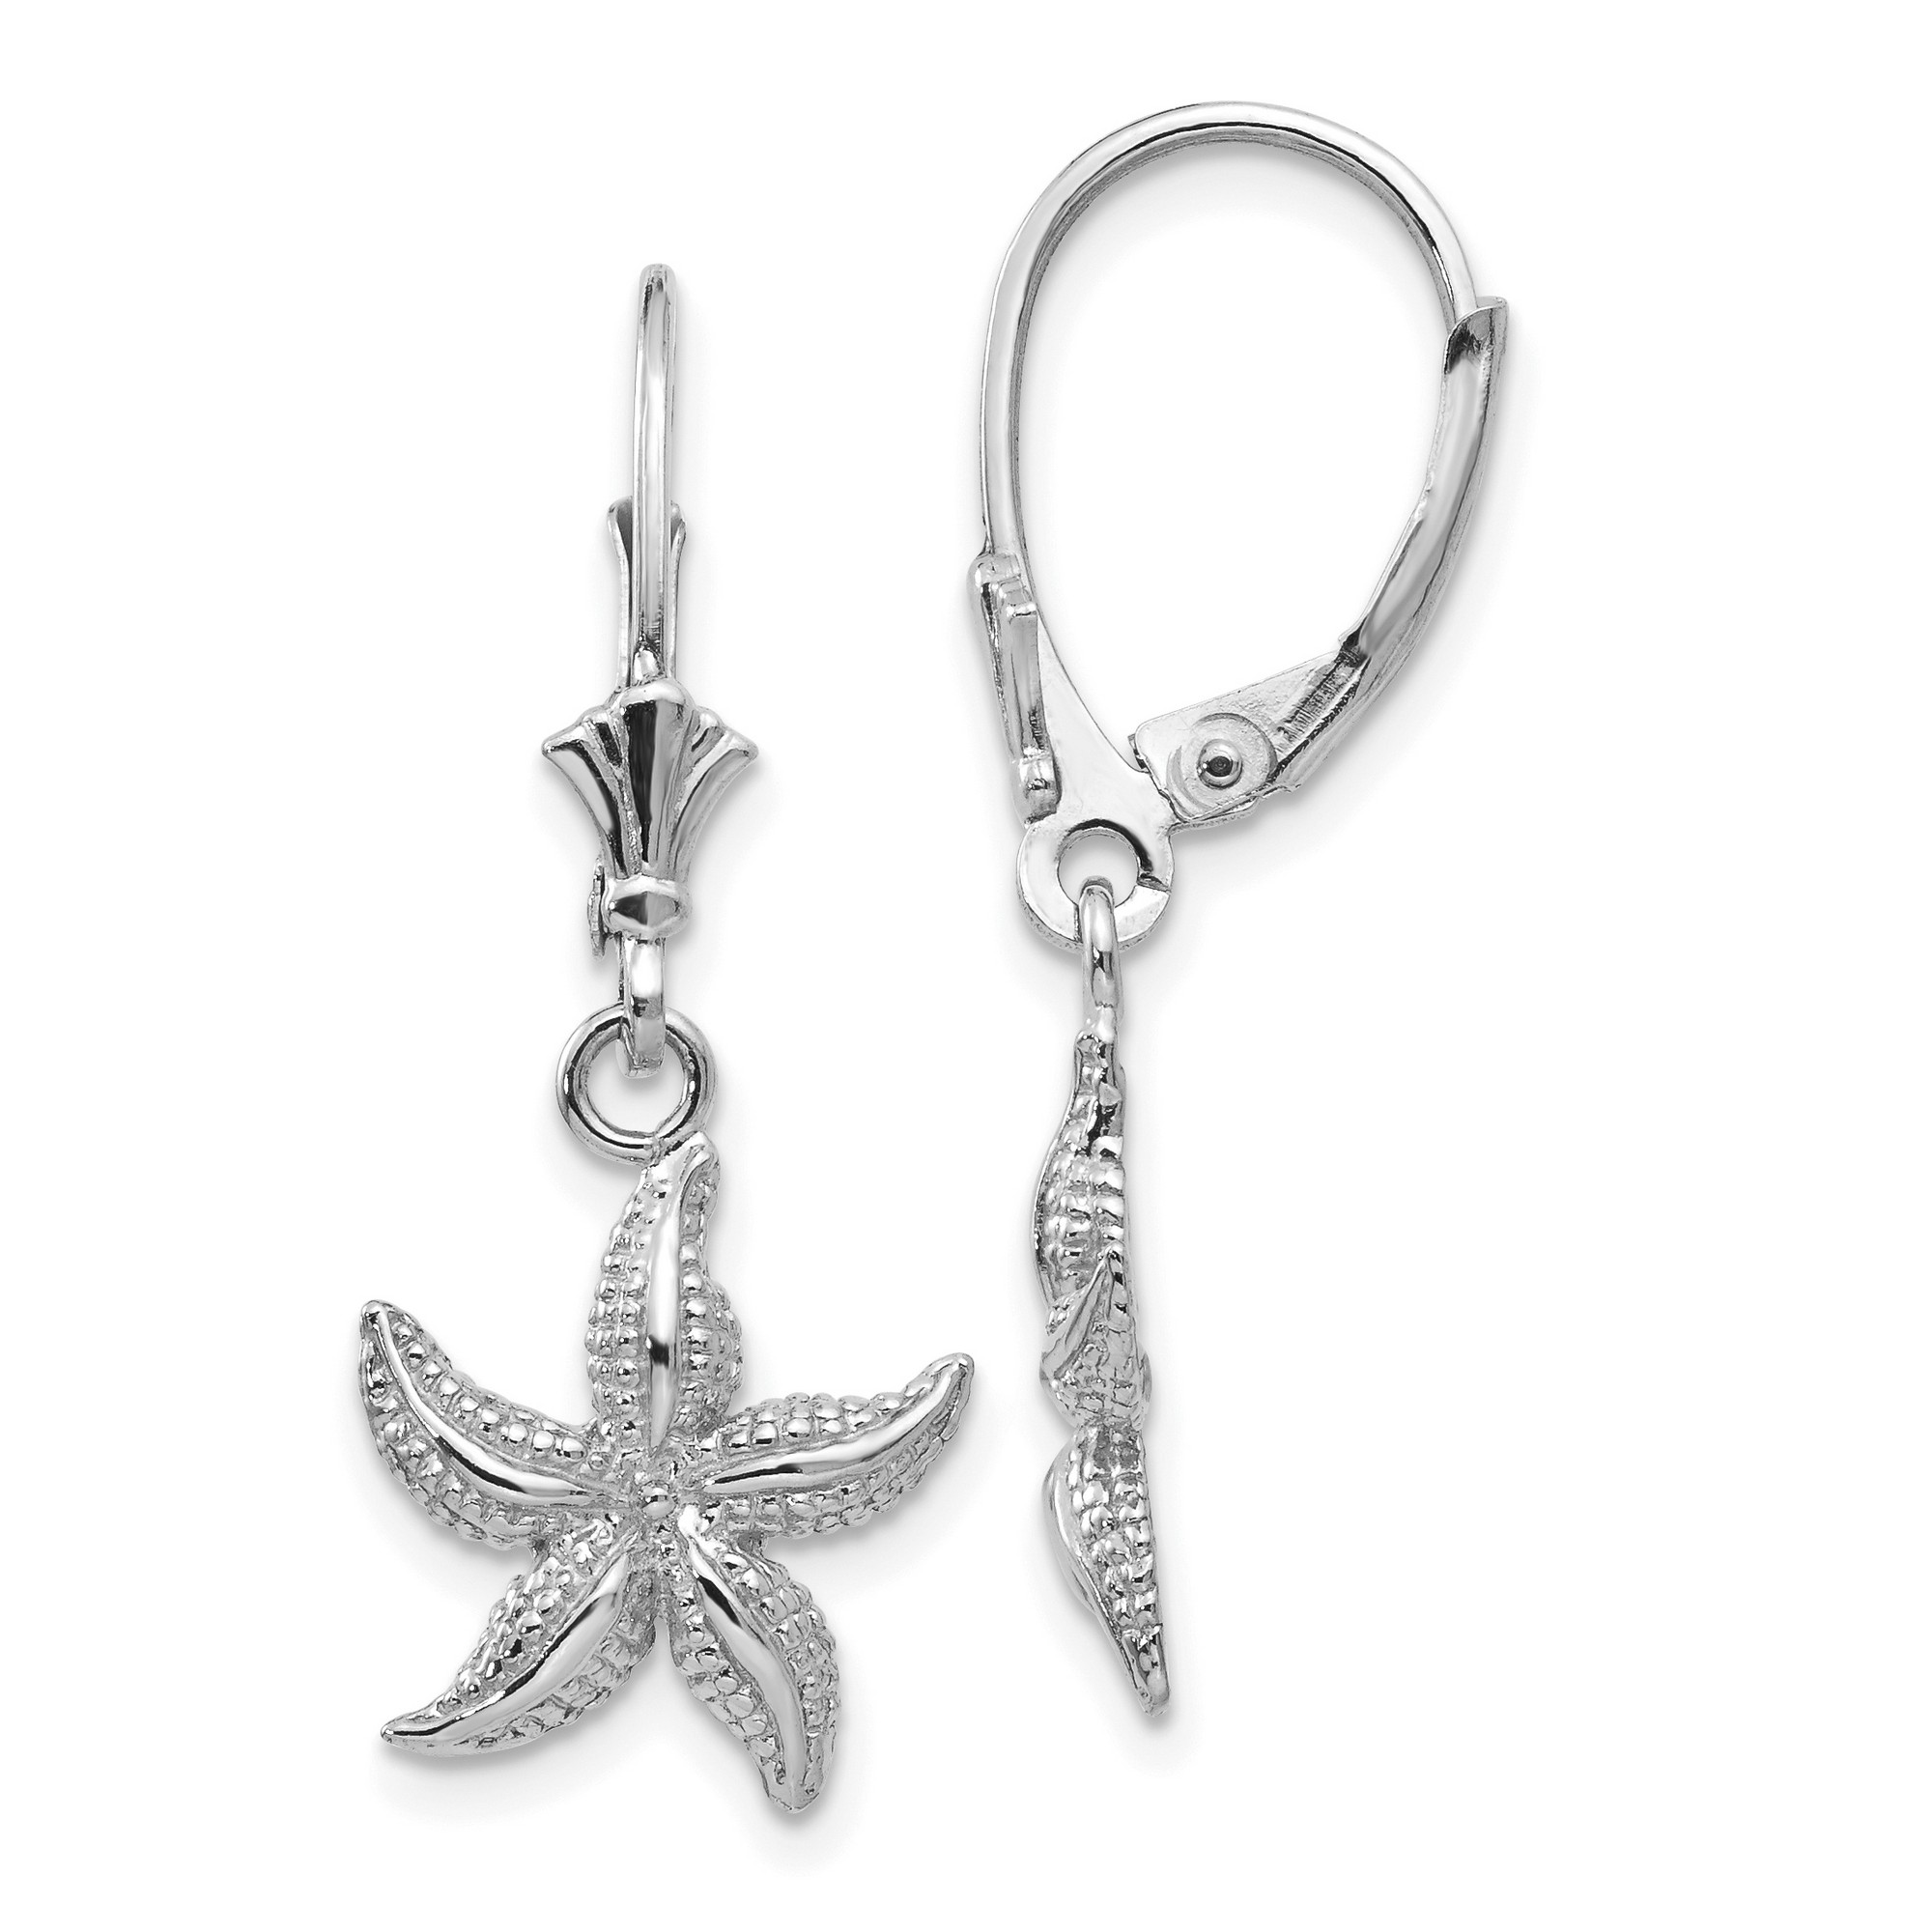 Pre-owned Jewelry Stores Network Polished And Textured Starfish Dangle Leverback Earrings In Real 14k White Gold